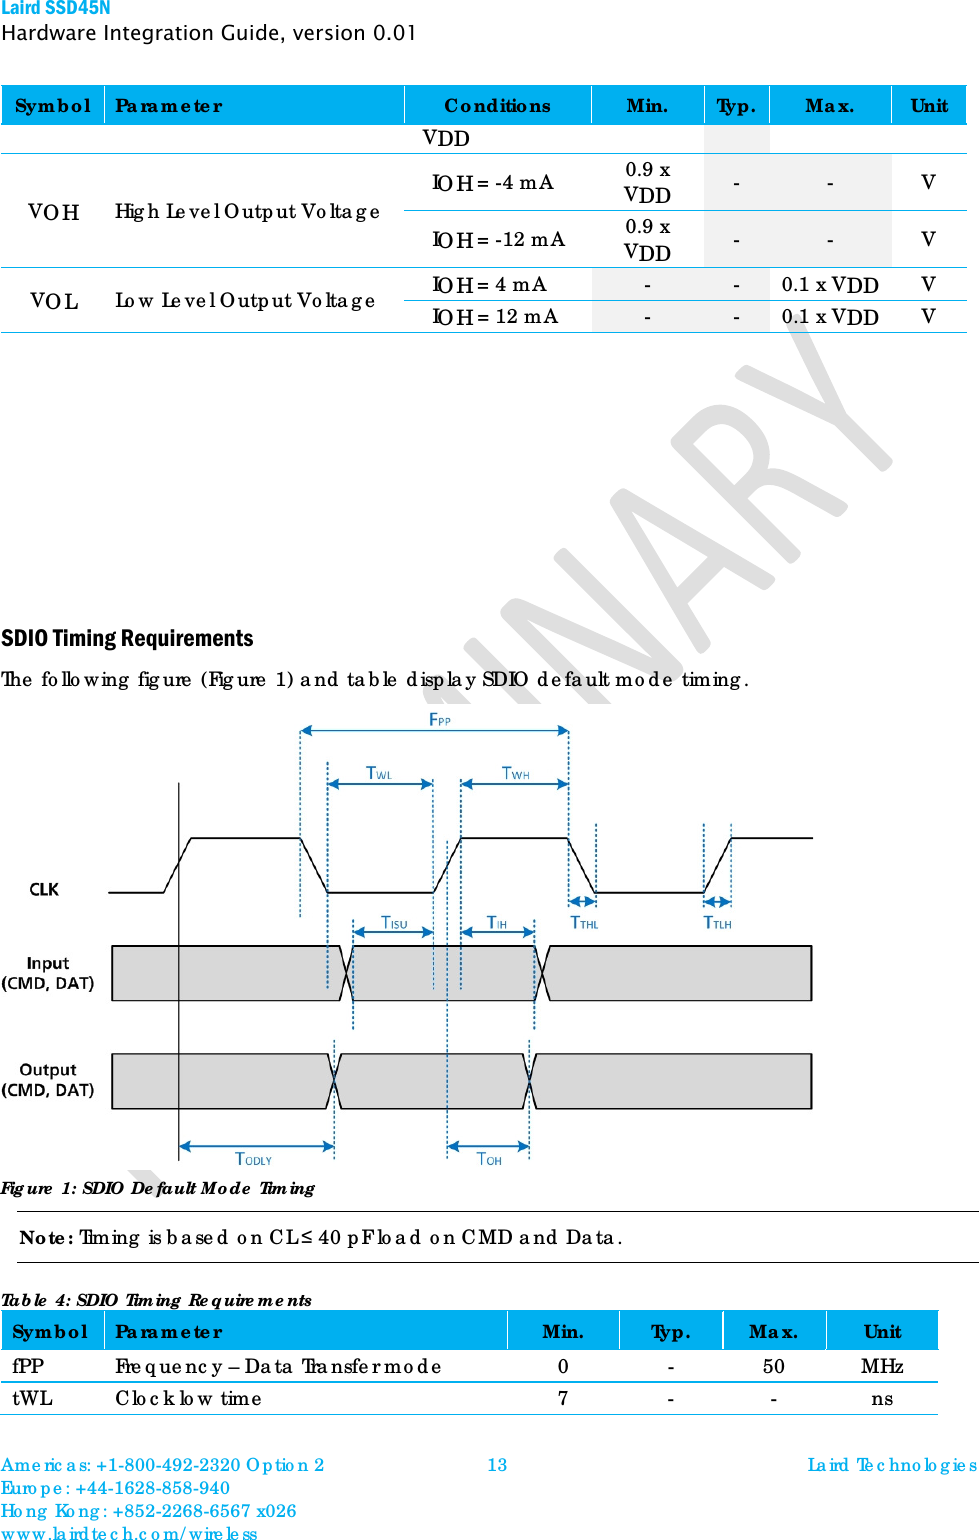 Laird SSD45N Hardware Integration Guide, version 0.01 Symbol Parameter Conditions Min. Typ. Max. Unit VDD VOH High Level Output Voltage IOH = -4 mA 0.9 x VDD -  -  V IOH = -12 mA 0.9 x VDD -  -  V VOL Low Level Output Voltage IOH = 4 mA - - 0.1 x VDD V IOH = 12 mA  -  -  0.1 x VDD  V           SDIO Timing Requirements The following figure (Figure 1) and table display SDIO default mode timing.  Figure 1: SDIO Default Mode Timing Note: Timing is based on CL ≤ 40 pF load on CMD and Data. Table 4: SDIO Timing Requirements Symbol Parameter Min.  Typ.  Max.  Unit fPP Frequency – Data Transfer mode 0 - 50 MHz tWL Clock low time  7  -  -  ns  Americas: +1-800-492-2320 Option 2 Europe: +44-1628-858-940 Hong Kong: +852-2268-6567 x026 www.lairdtech.com/wireless 13 Laird Technologies  